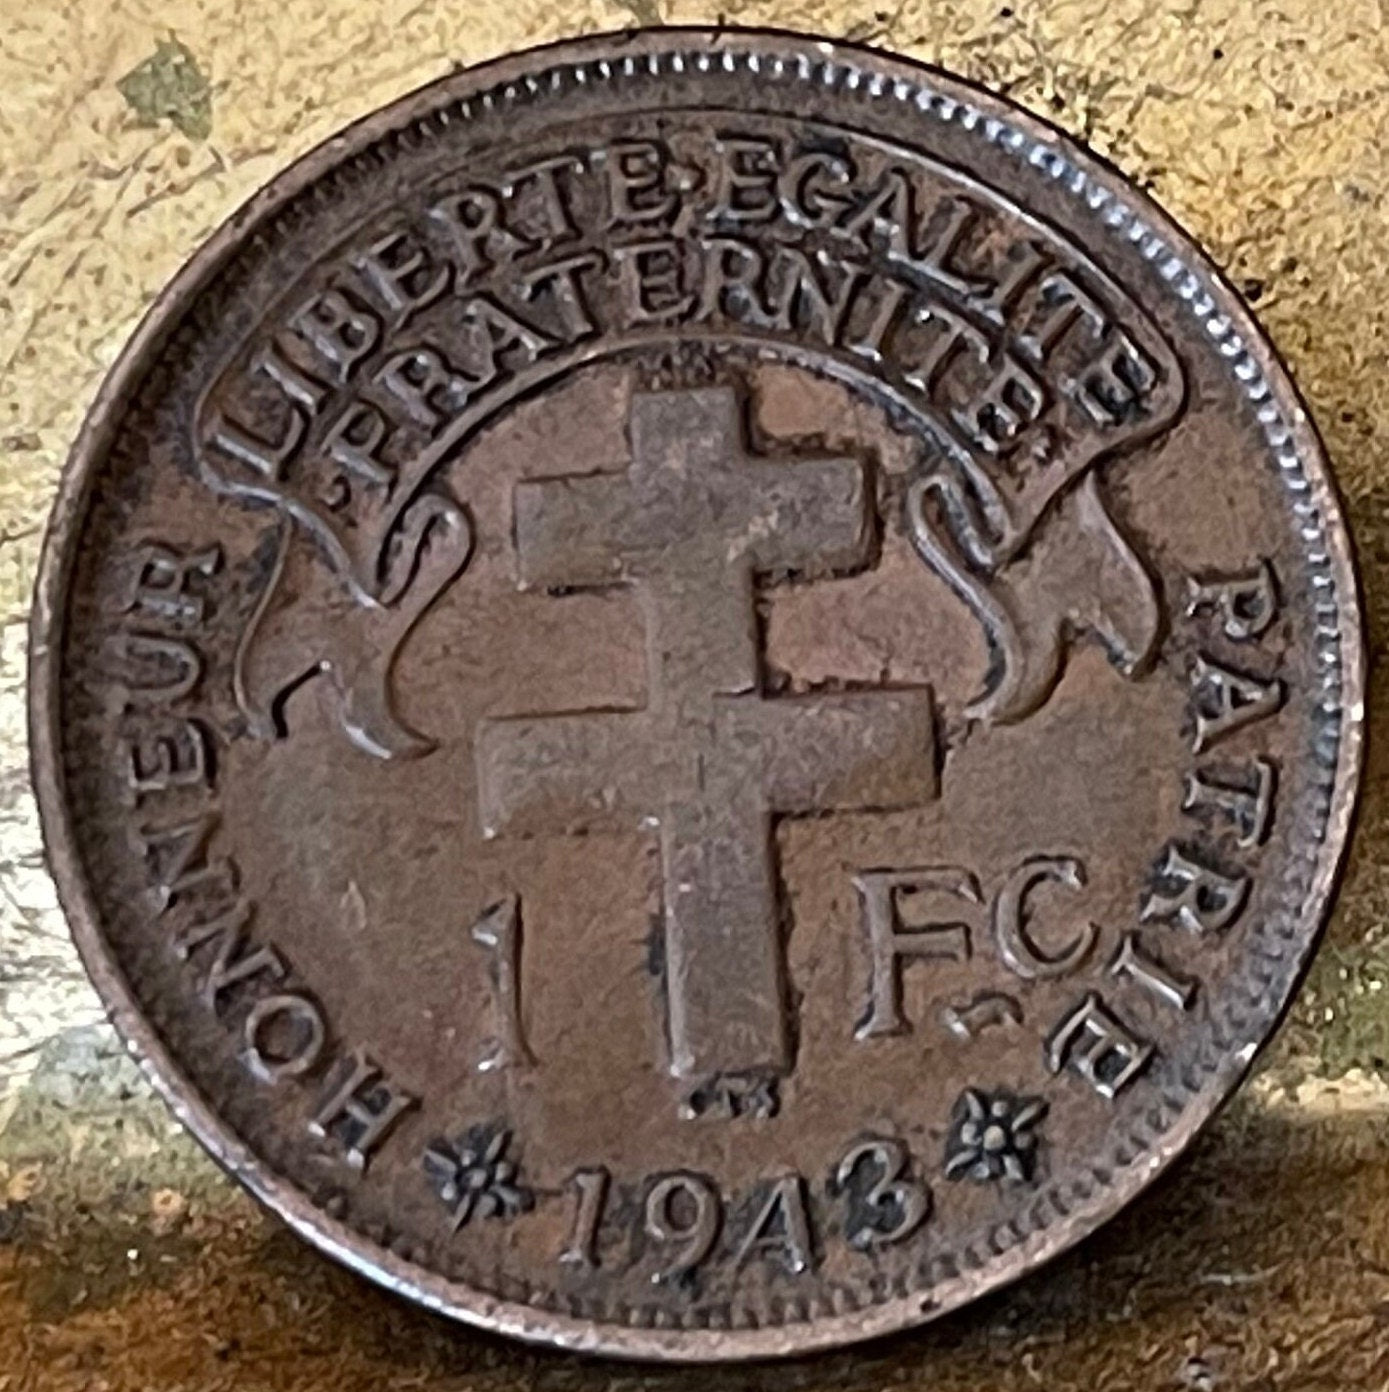 Free French Cross of Lorraine & Gallic Rooster Chantecler 1 Franc French Cameroon Authentic Coin Money for Jewelry (Le Coq Francais) 1943